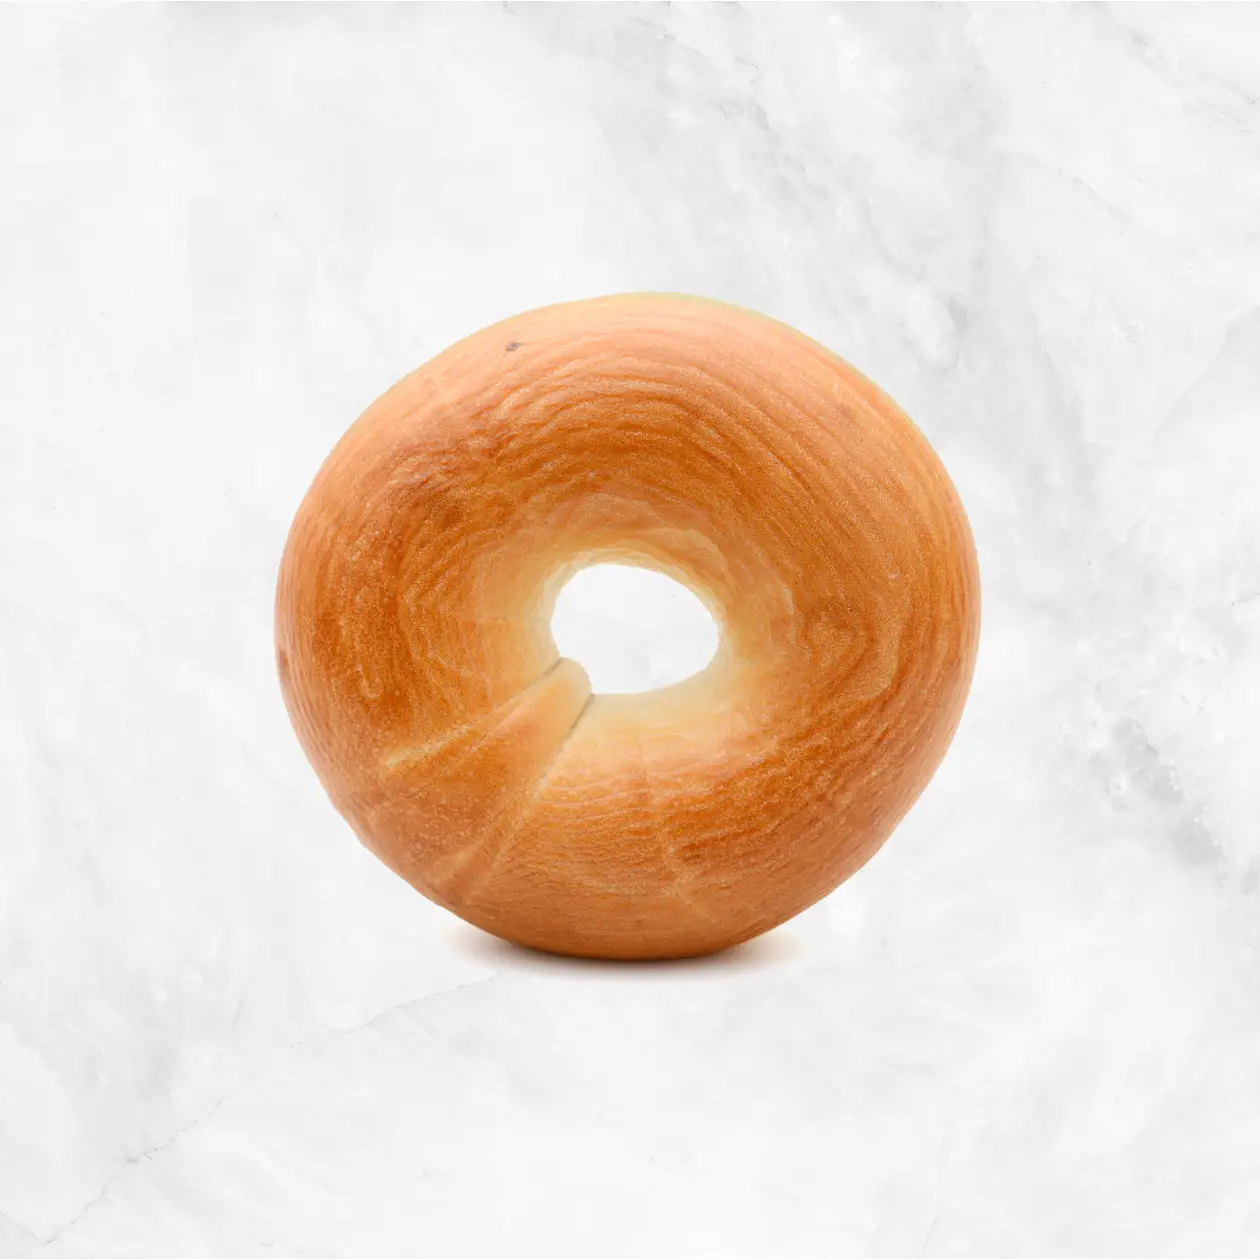 Organic Wood Fired Plain Bagels Delivery